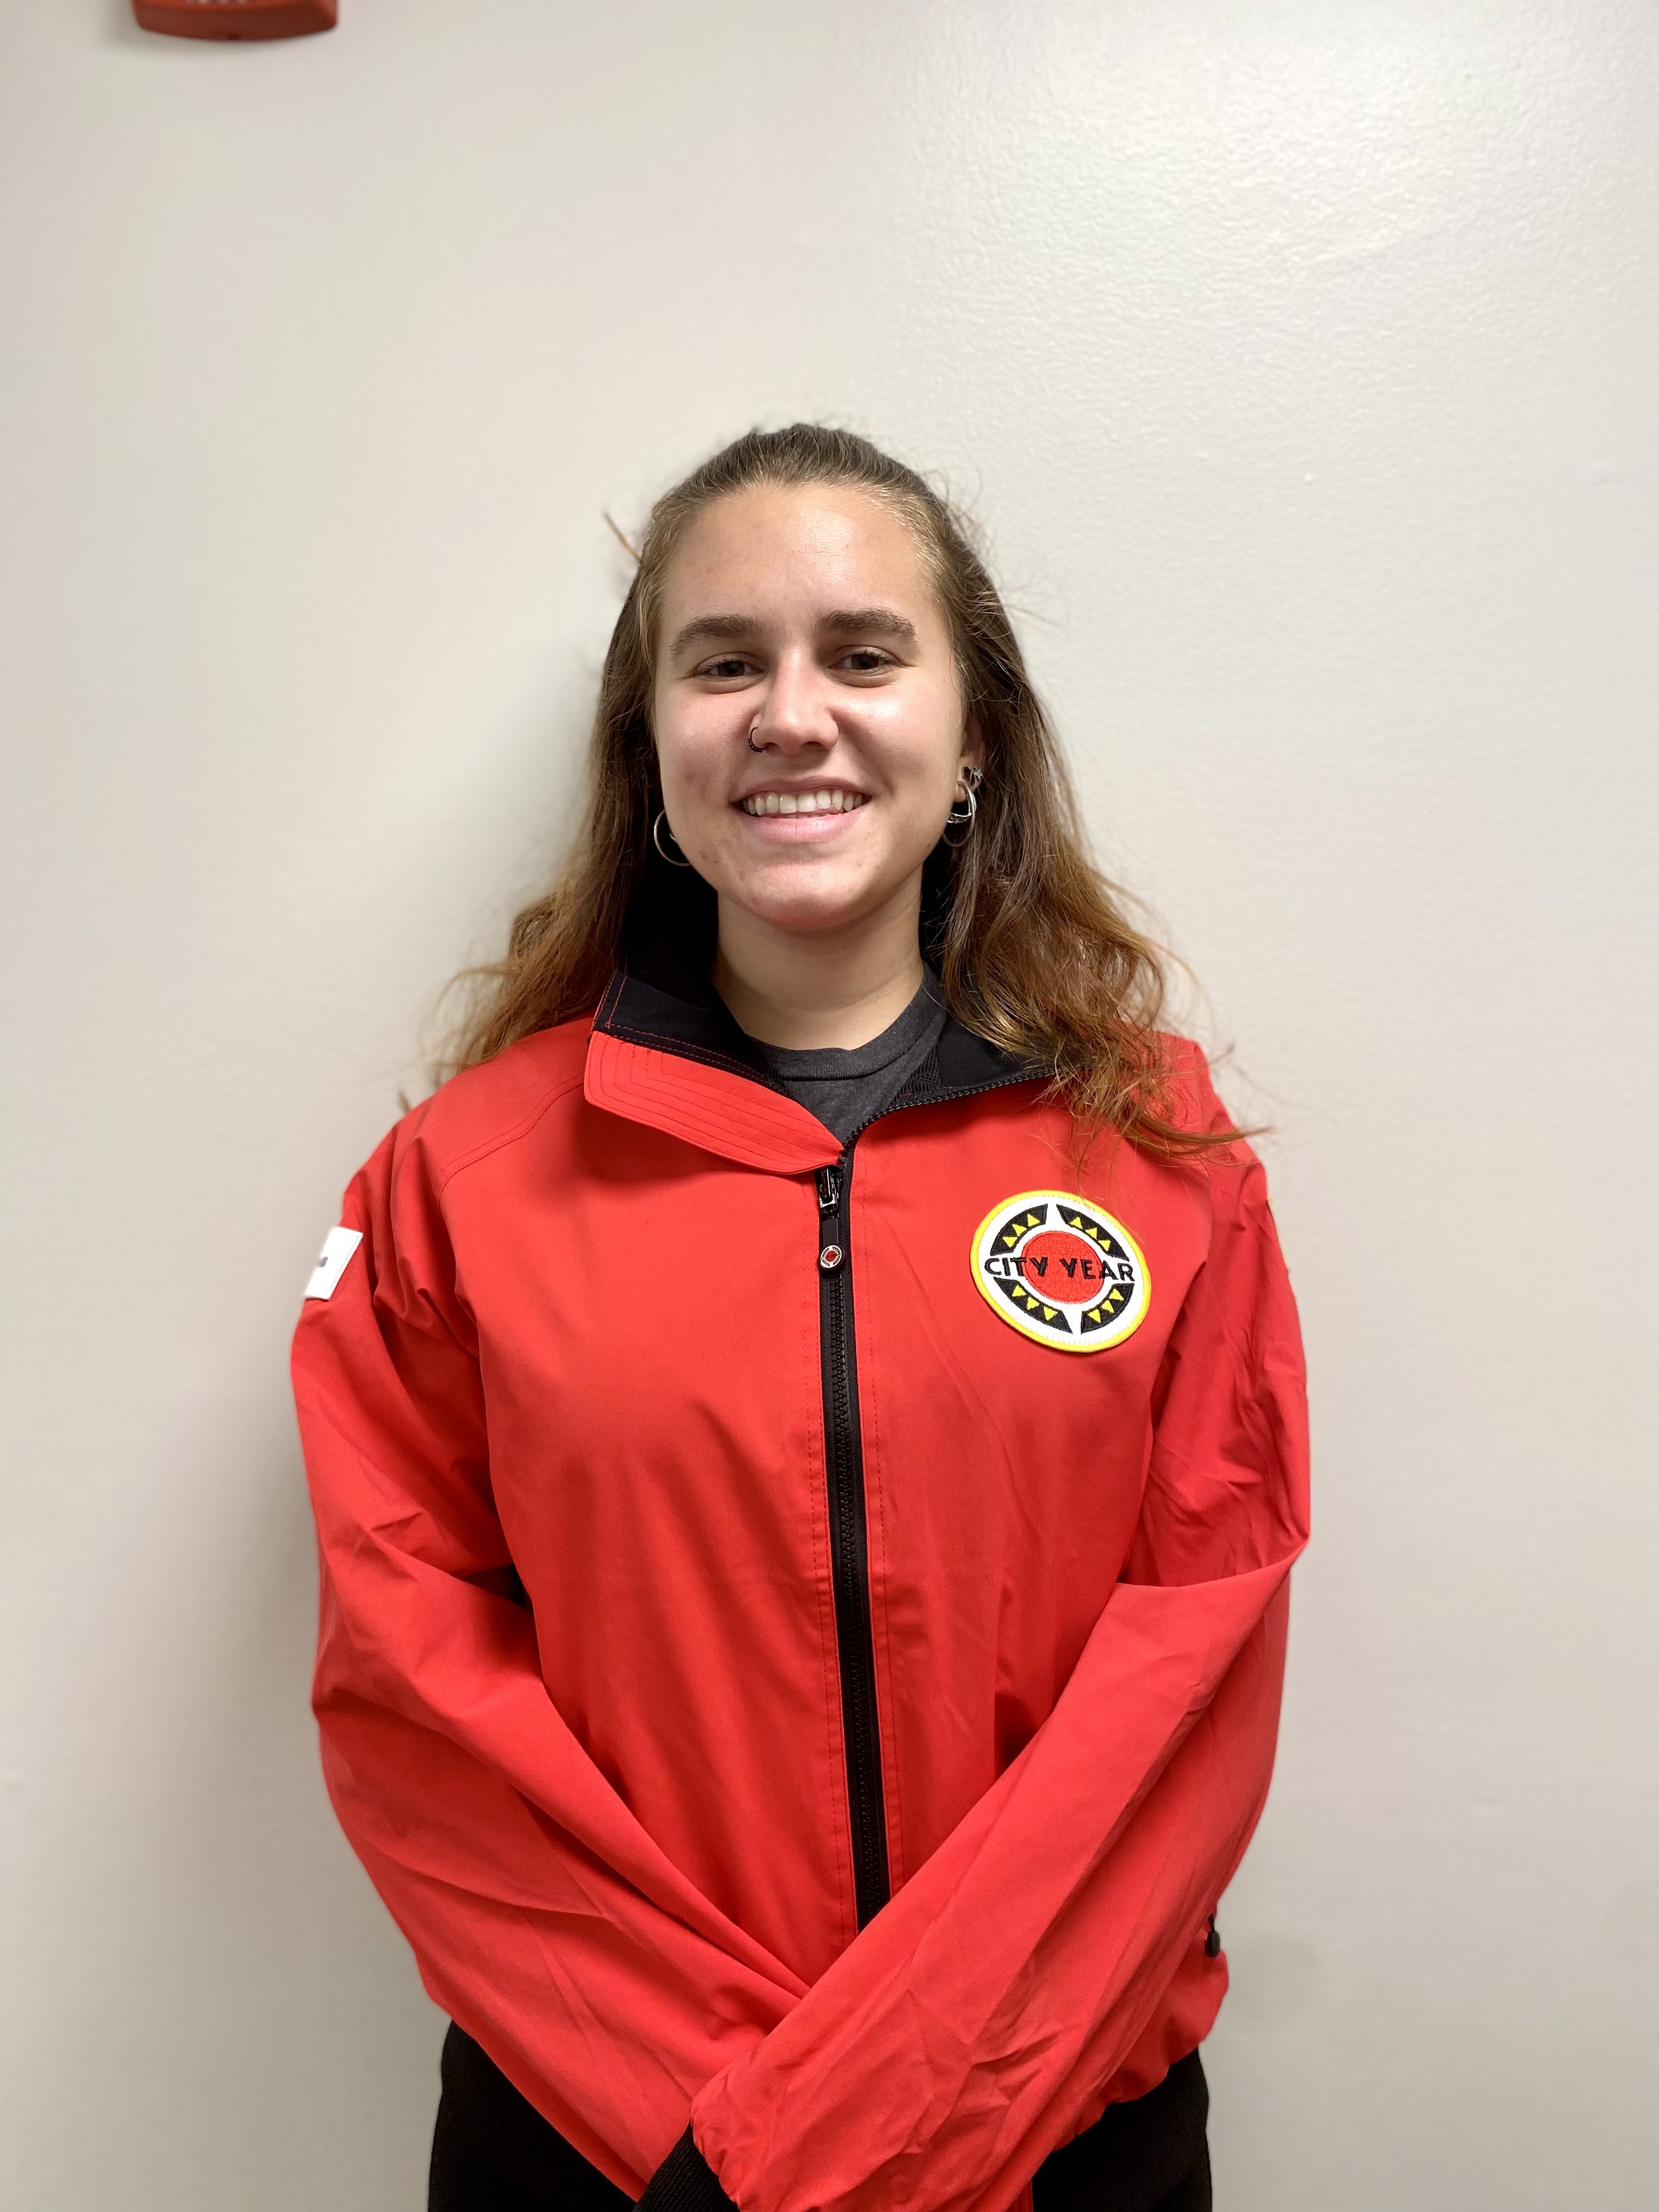 Light-skinned woman with brown hair wearing red City Year jacket